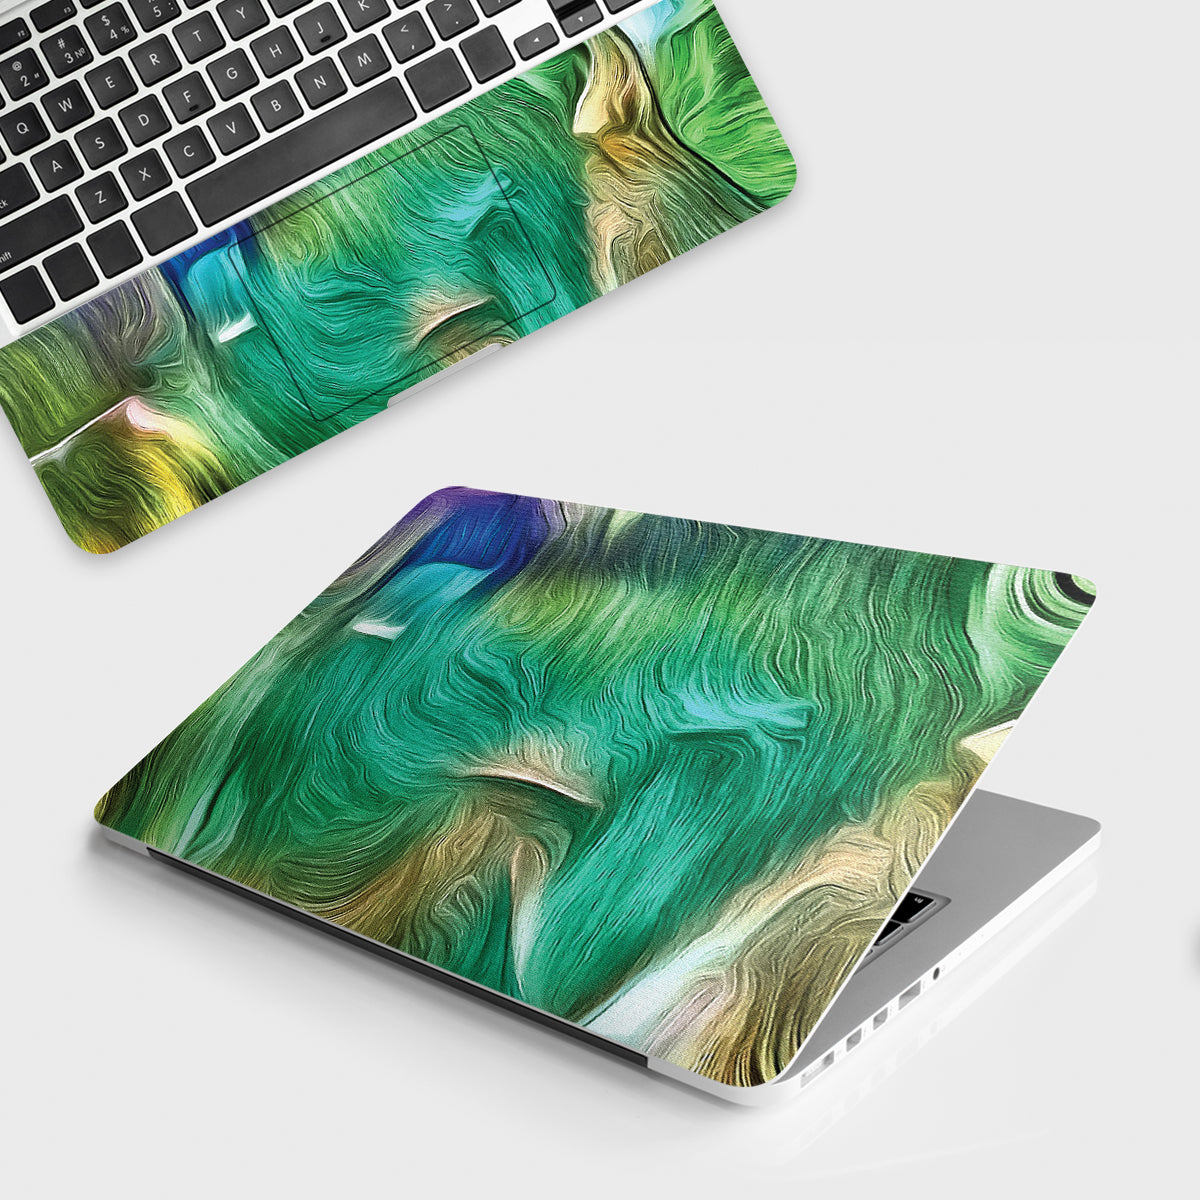 Fomo Store Laptop Skins Abstract Green Wave